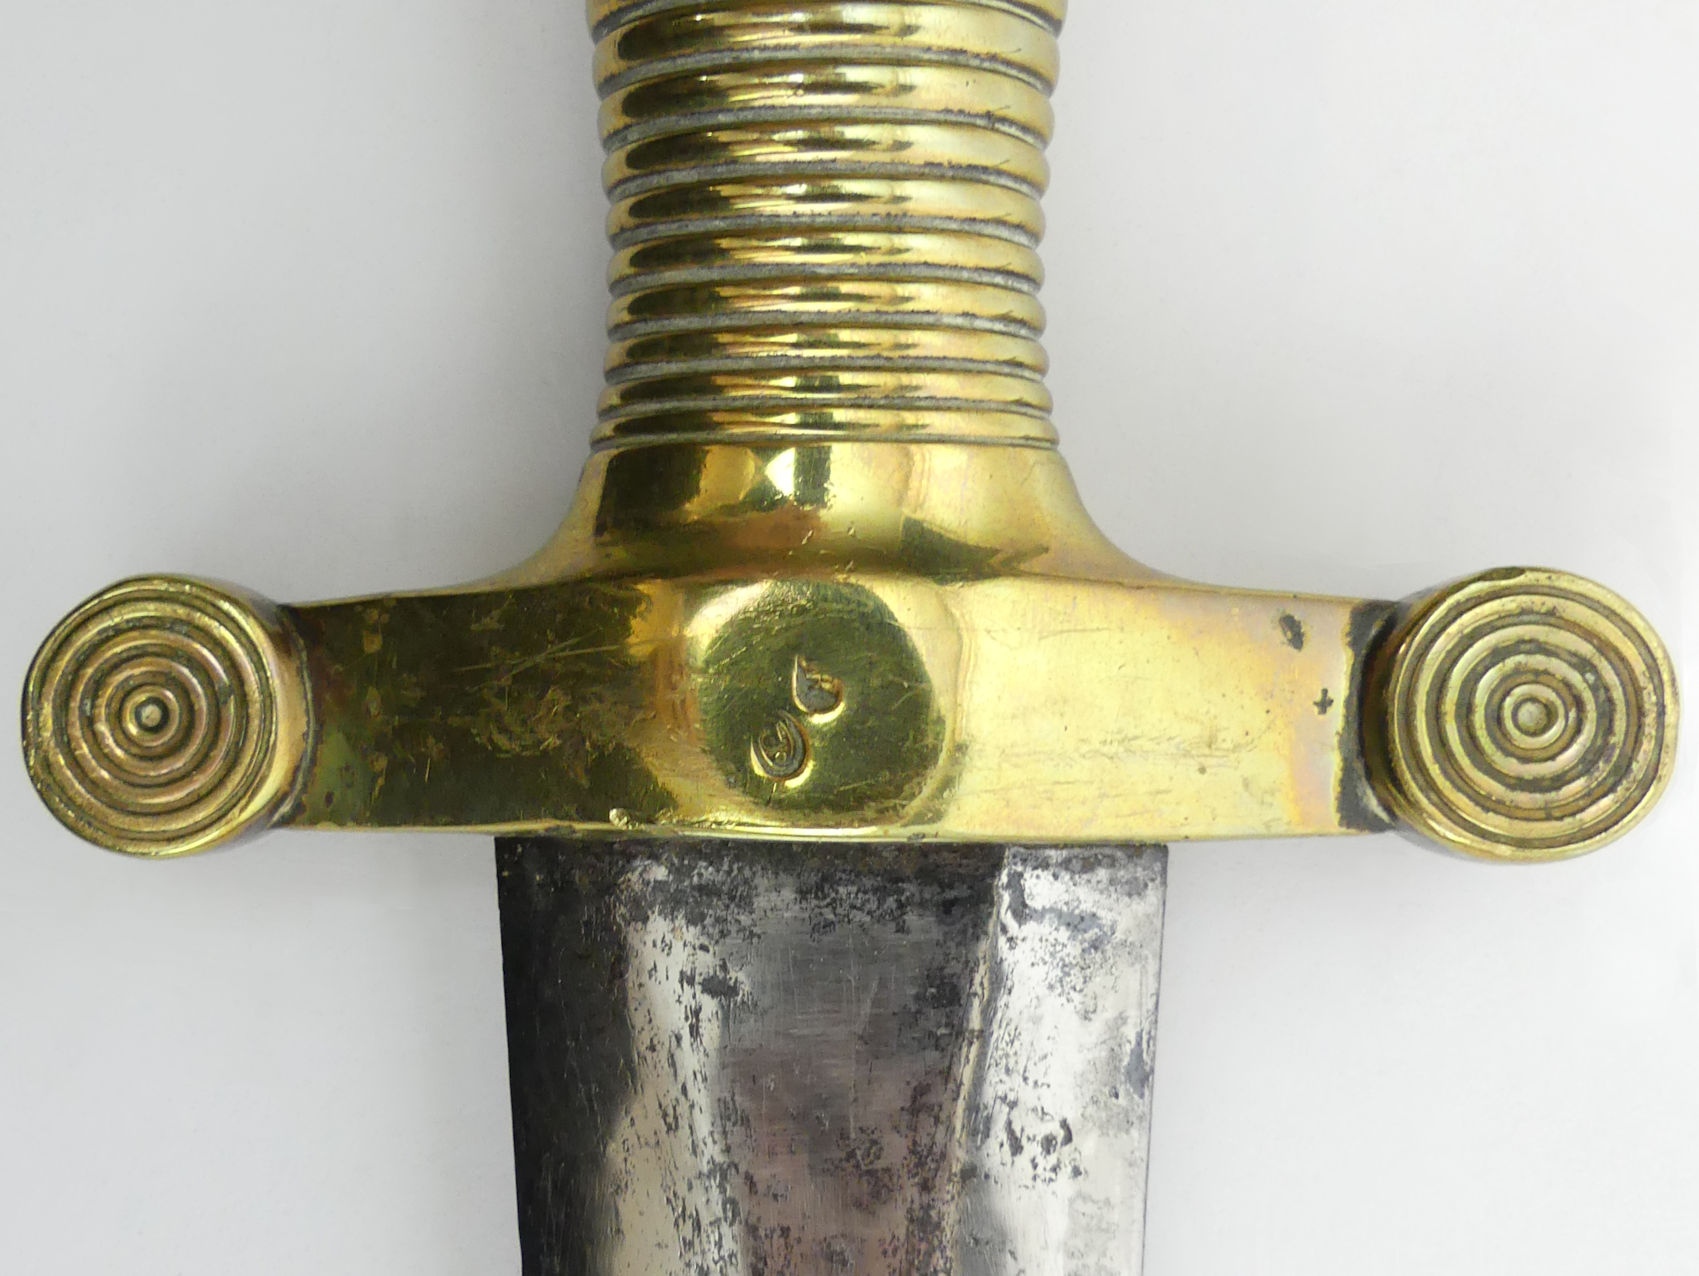 French 1831 pattern French artillery sidearm Gladius type sword and scabbard, 63.5cm length of - Image 11 of 12